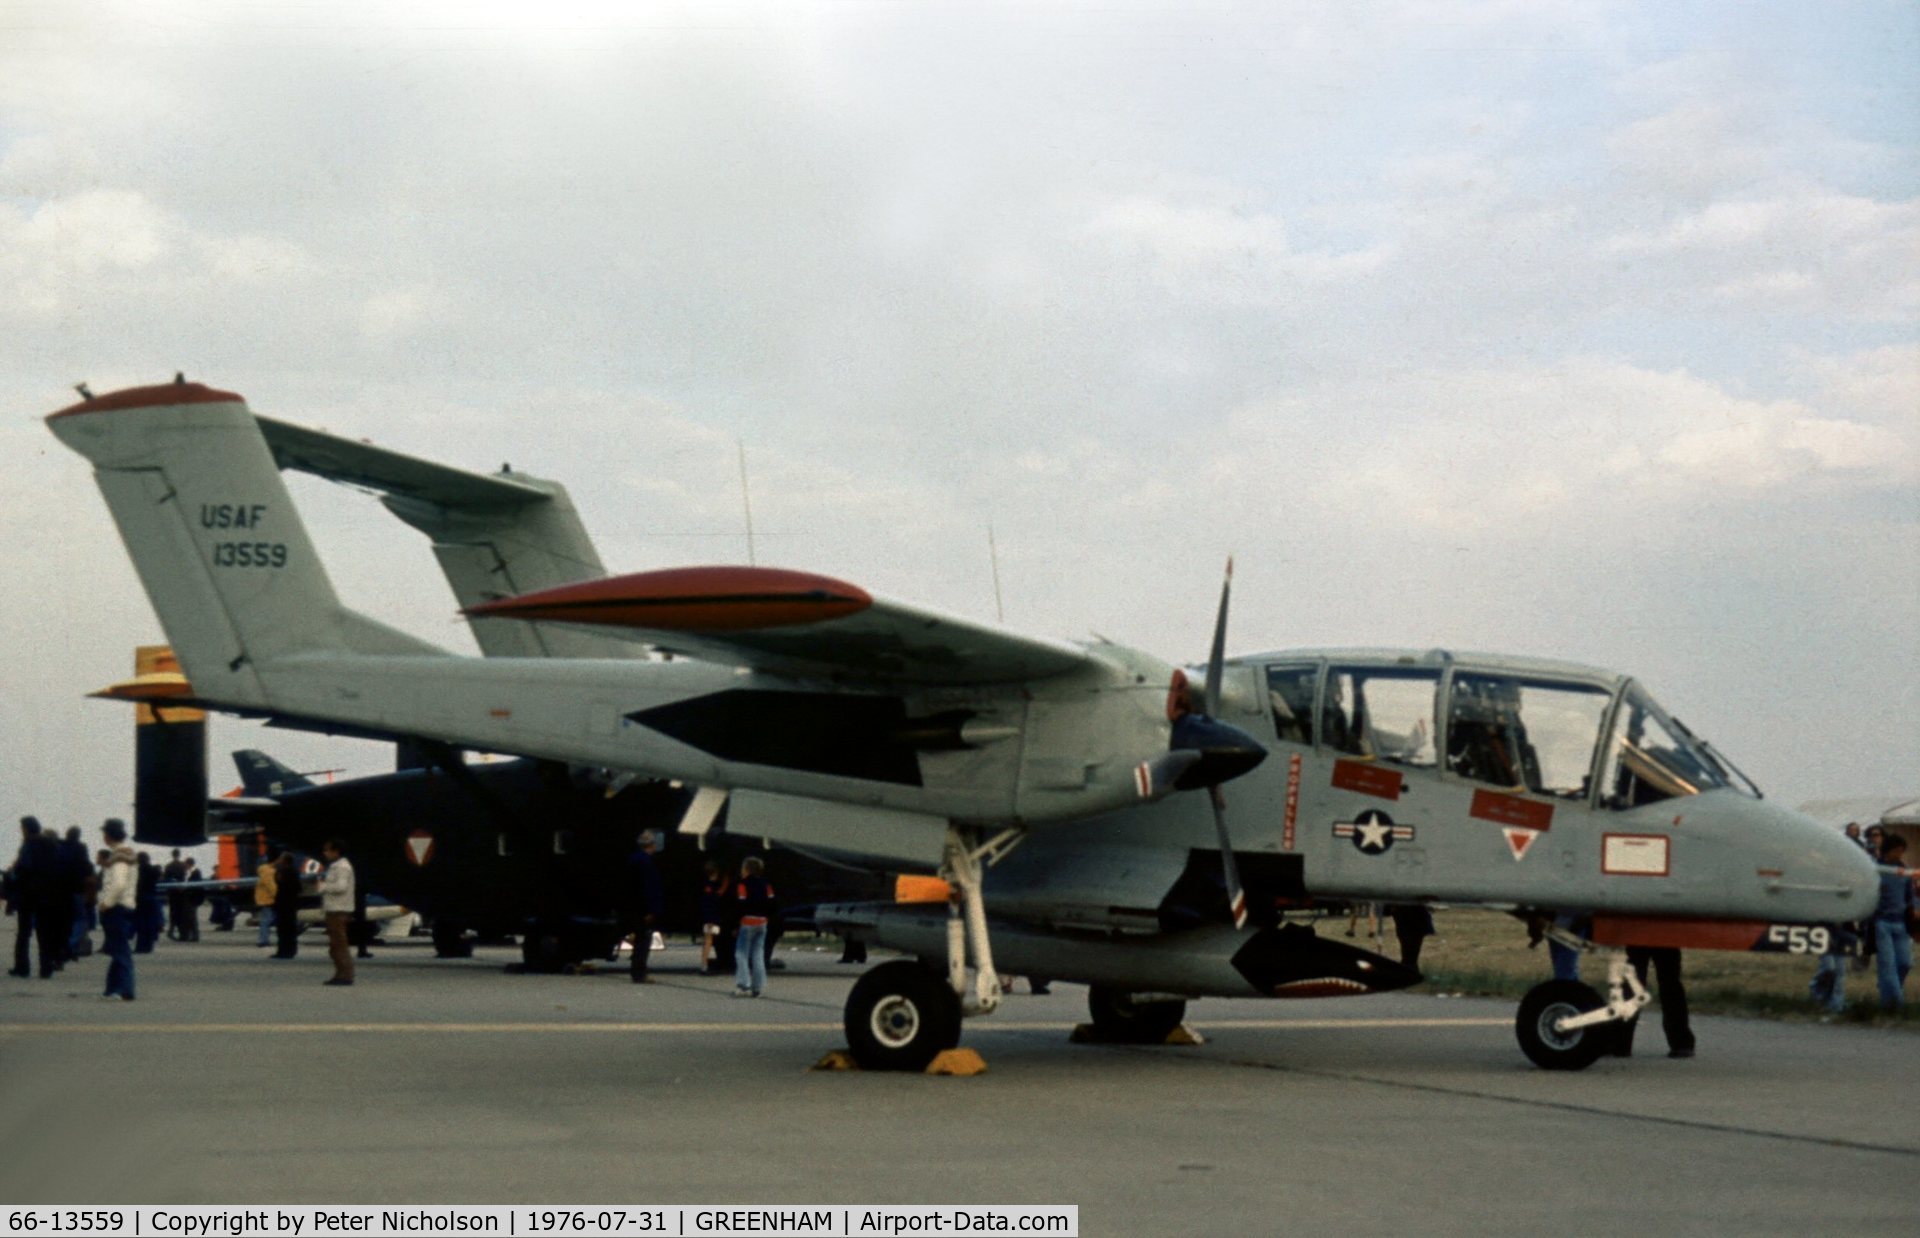 66-13559, 1966 North American Rockwell OV-10A Bronco C/N 305-8, OV-10A Bronco of 601 Tactical Control Wing at the 1976 Intnl Air Tattoo at RAF Greenham Common.